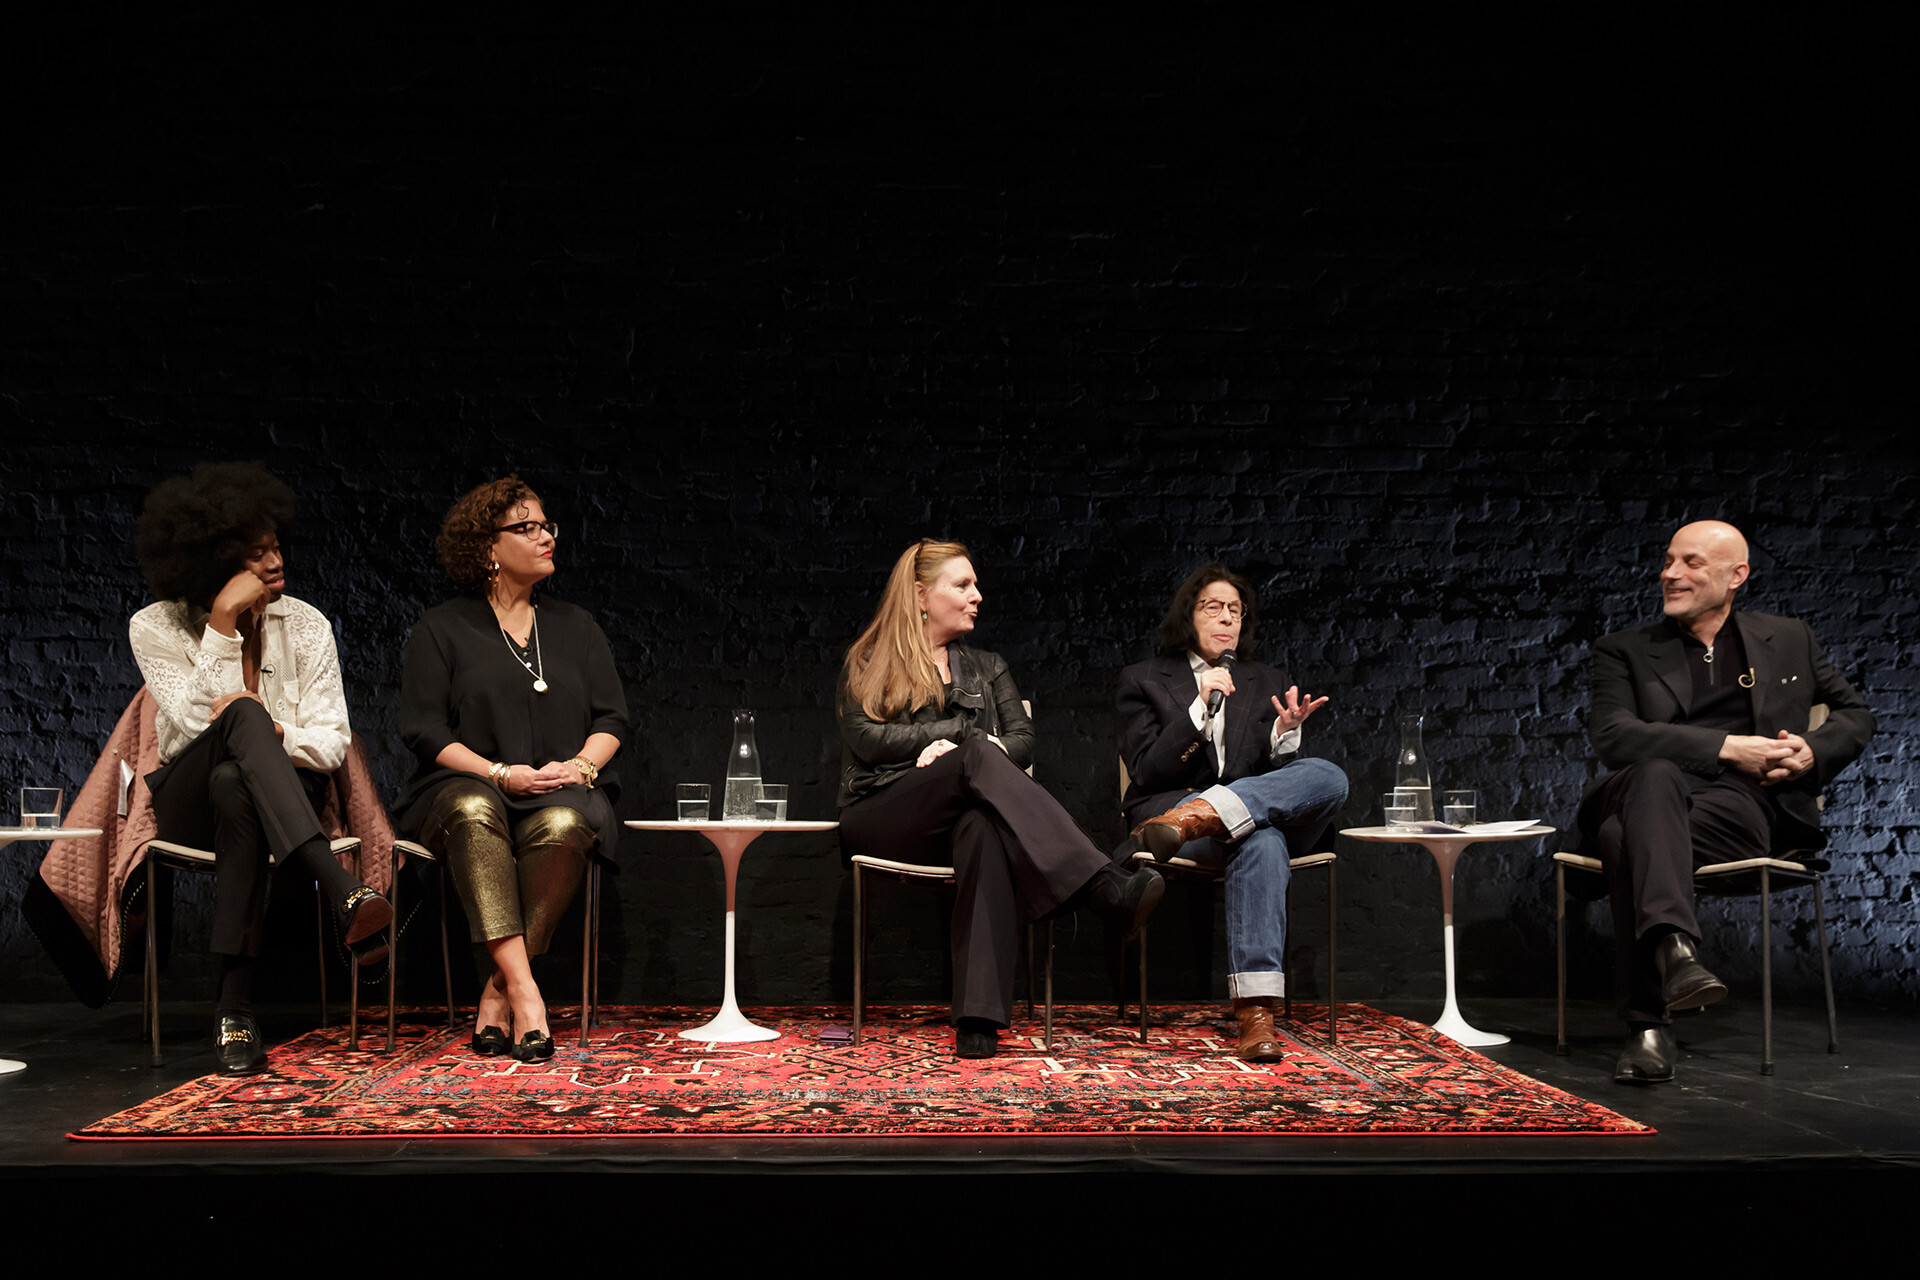 A photo of the panel at the recent Power culture talk titled the power of the artist, which took place at the kitchen in new york in february 2020.